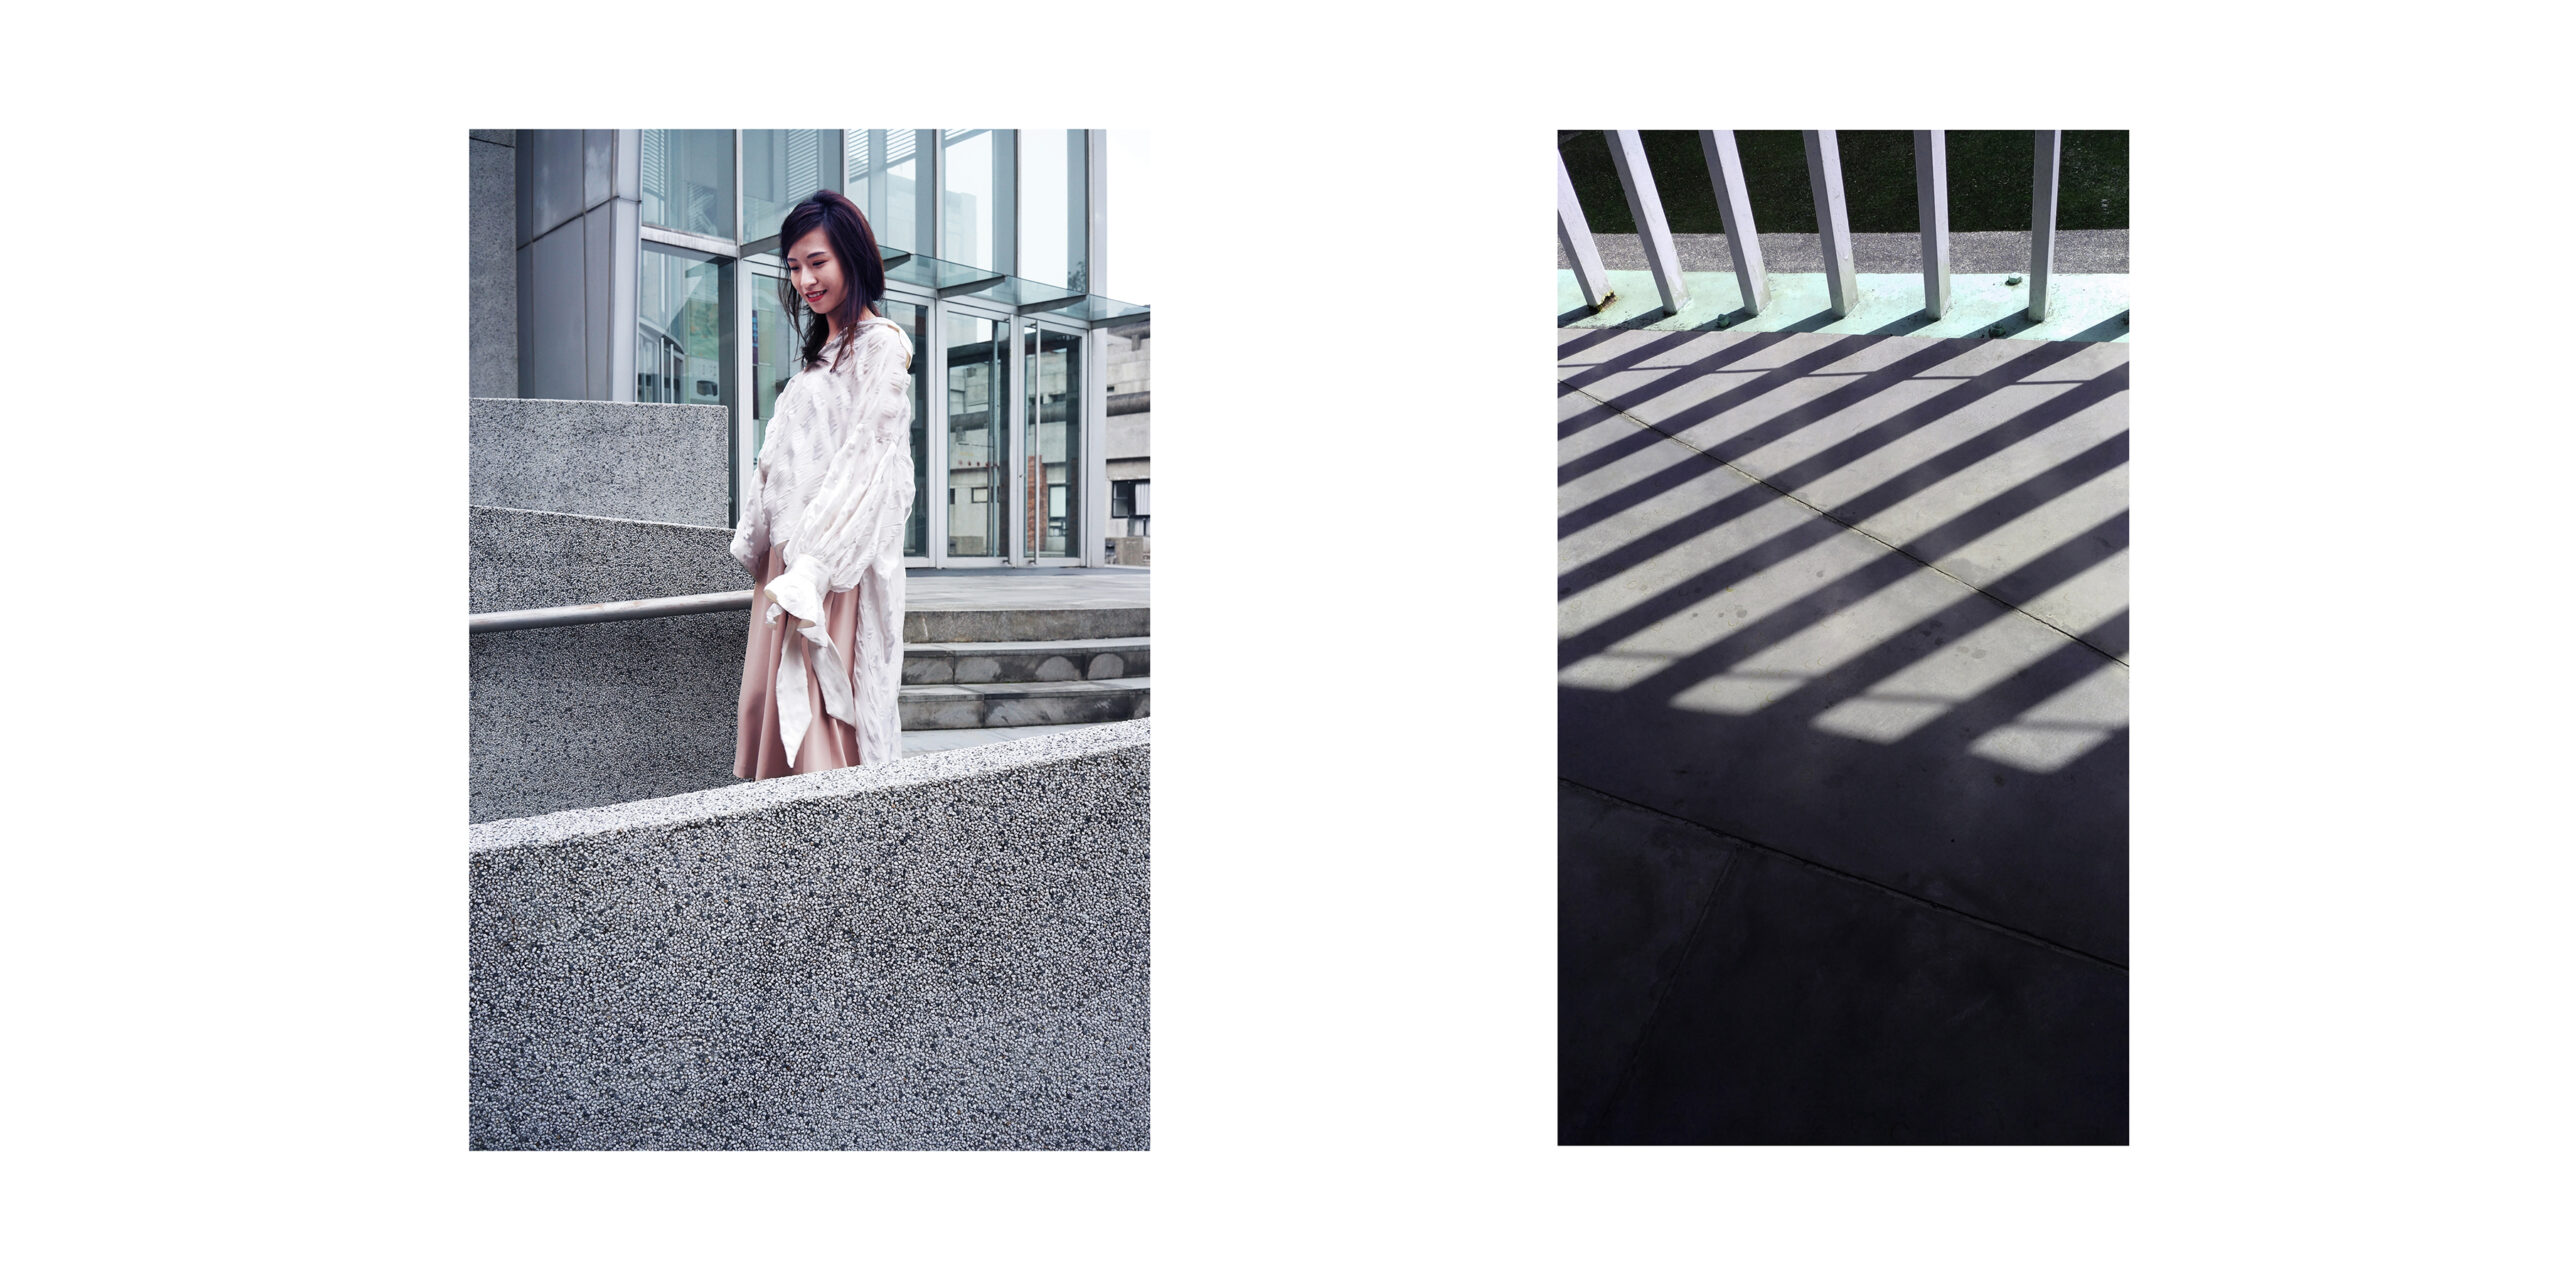 1 image of a girl in white standing near cement architecture, next to another image of sunlight casting shadows on a patio